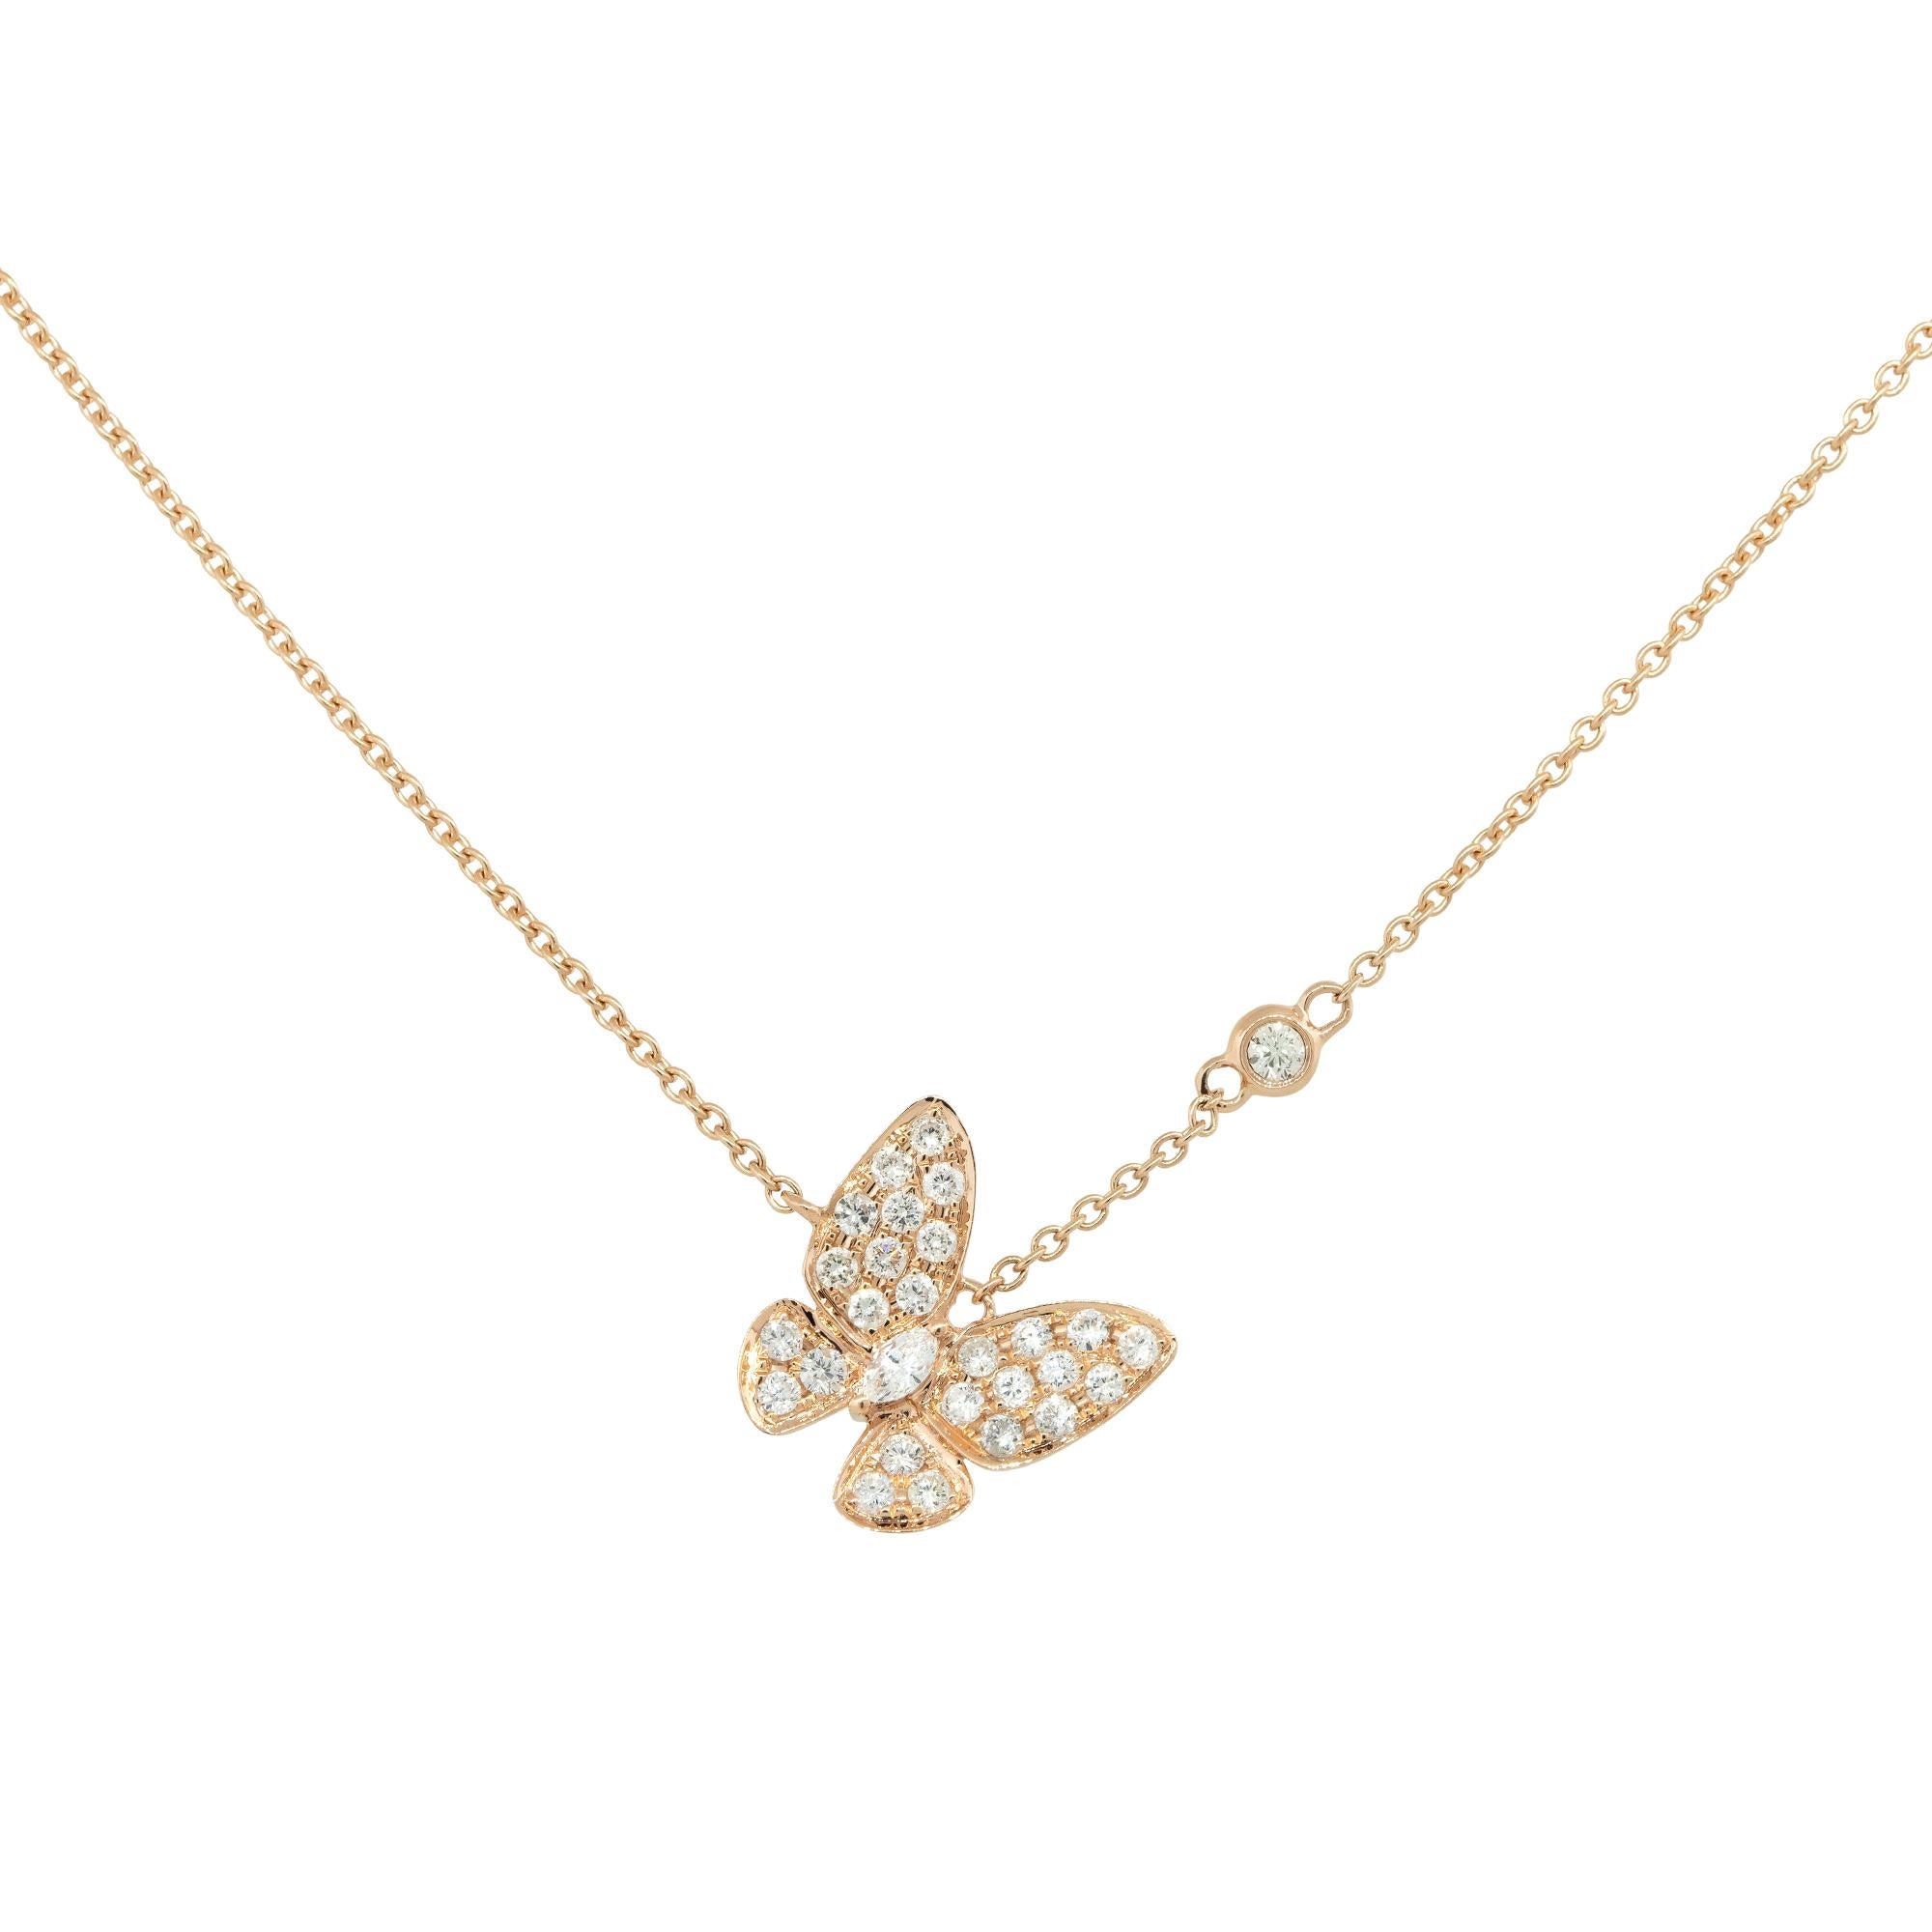 18k Rose Gold 0.62ctw Diamond Butterfly with Diamond Station Necklace
Material: 18k Rose Gold
Diamond Details: Approximately 0.62ctw of Marquise and Round Brilliant cut Diamonds. There is a bezel set round diamond station to the right of the